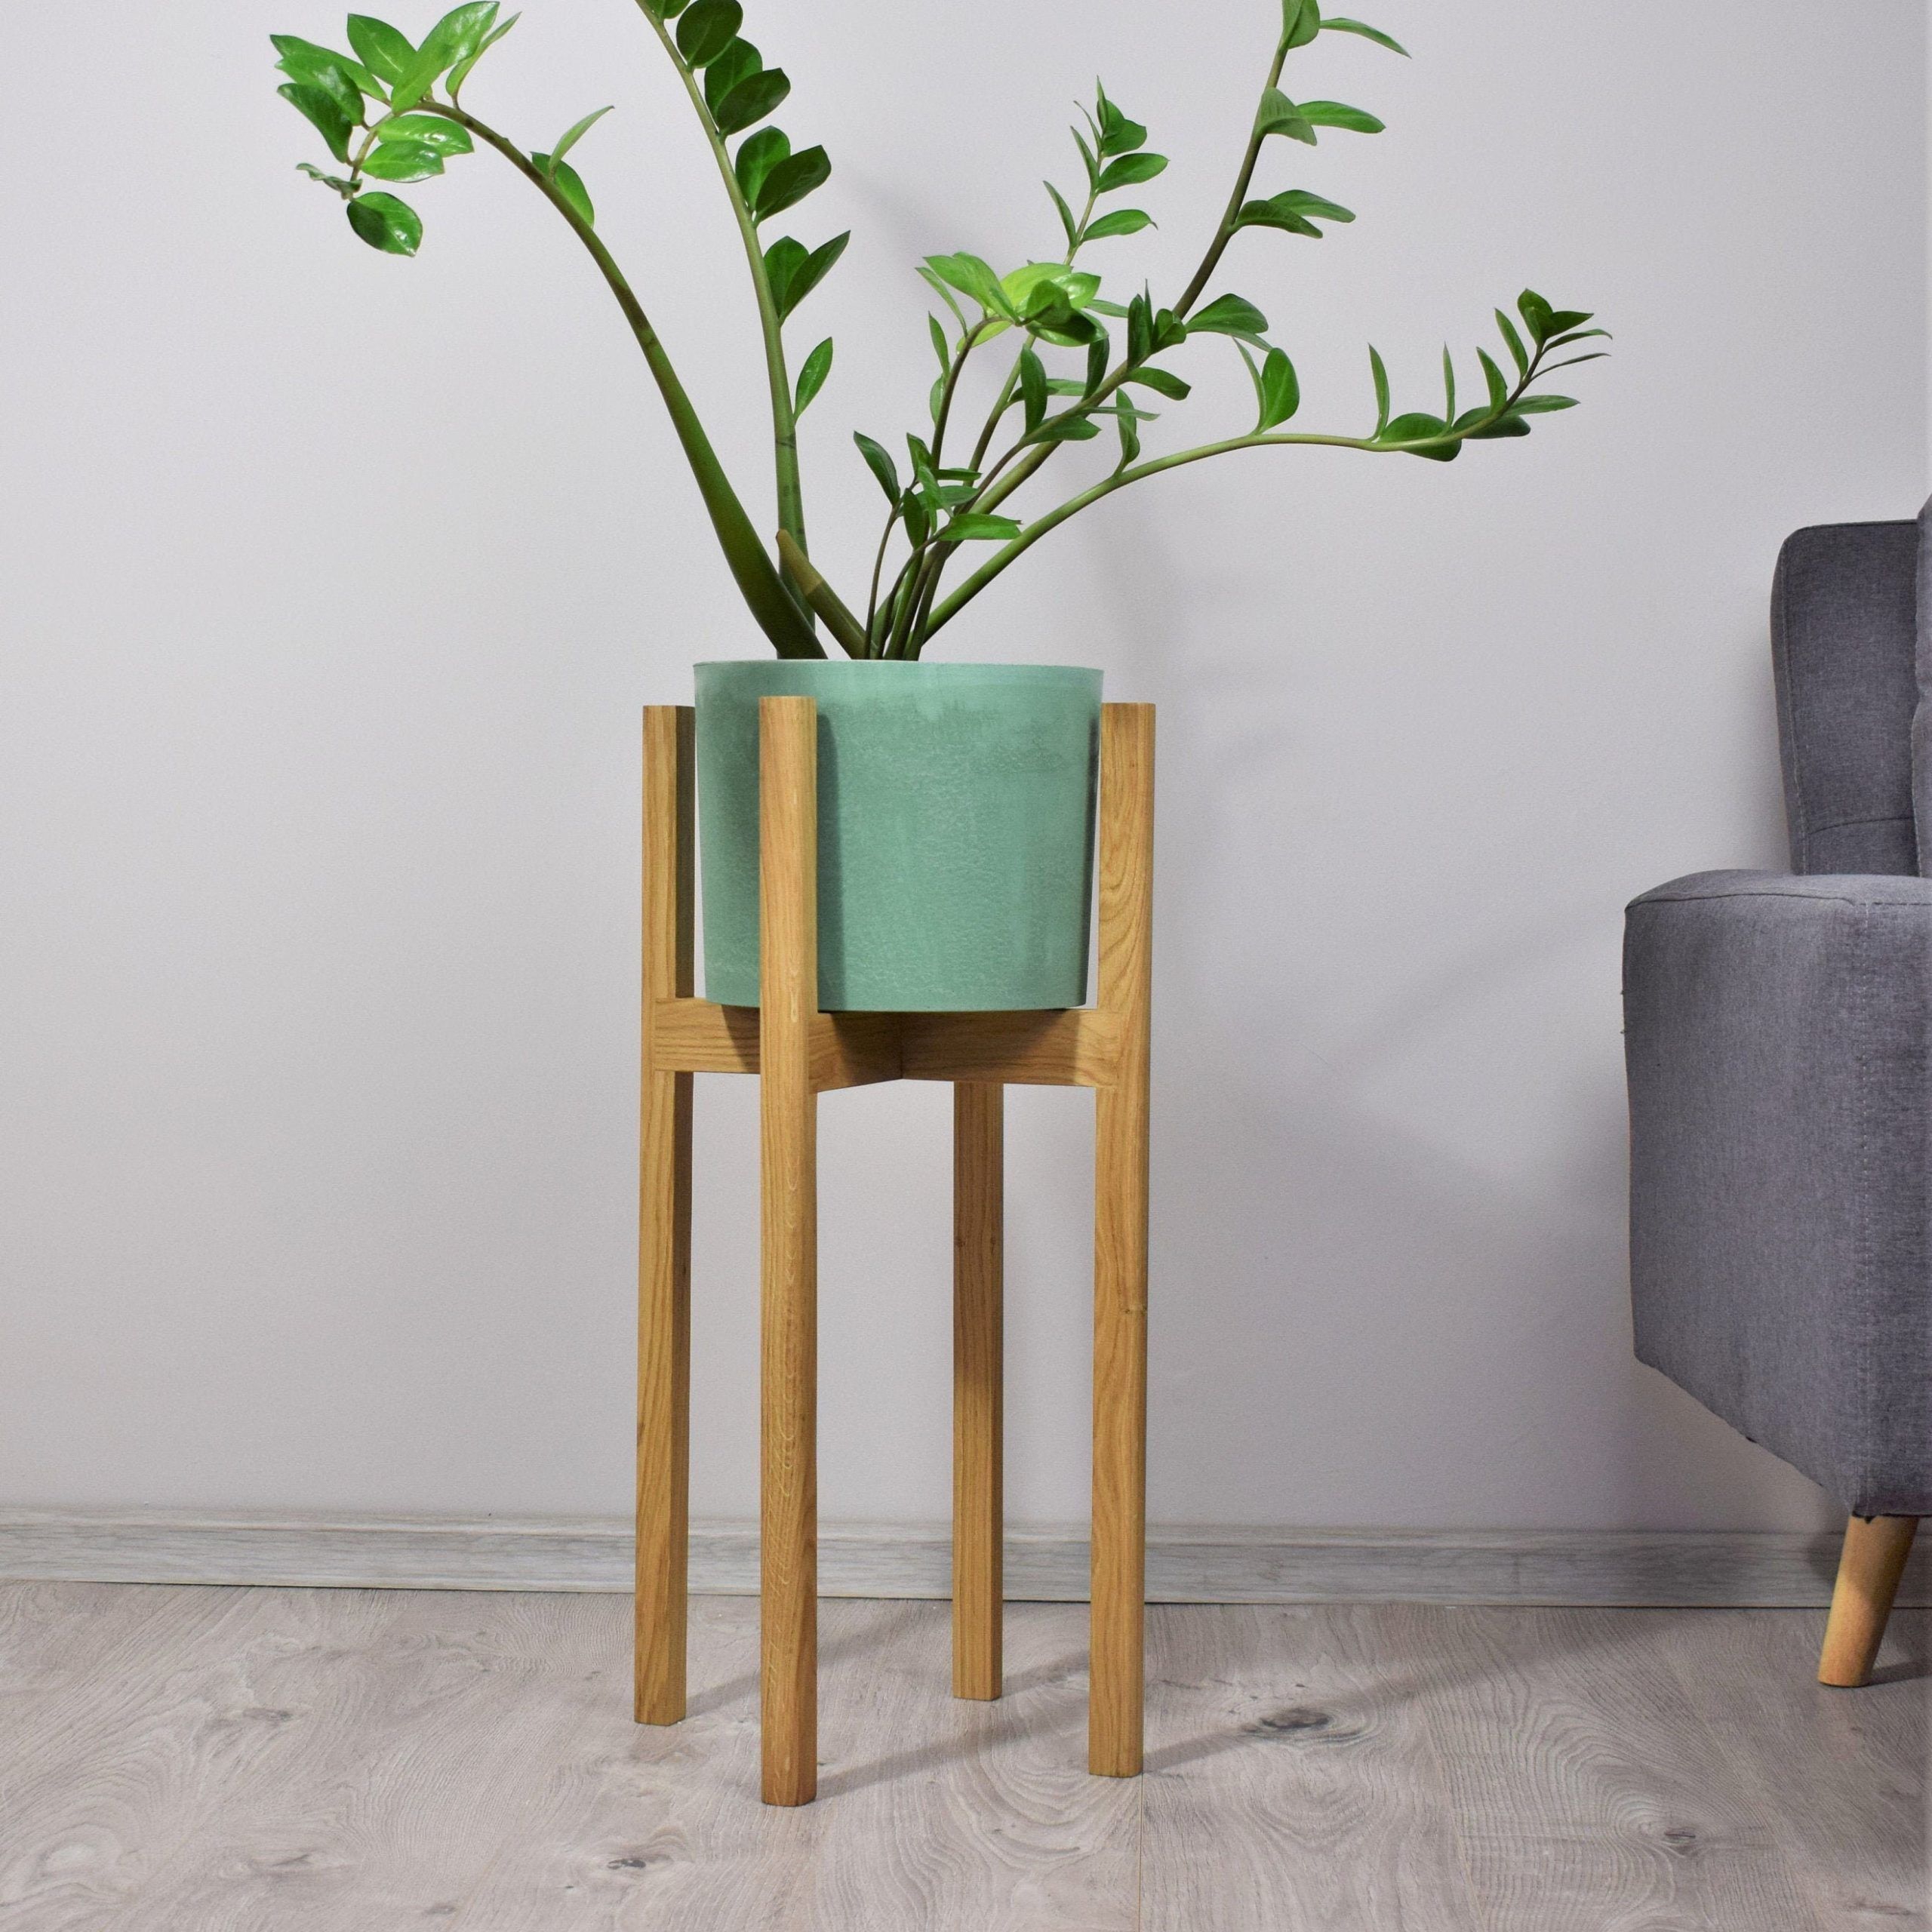 Tall Plant Stands Made Of Natural Oak Wood (View 2 of 15)